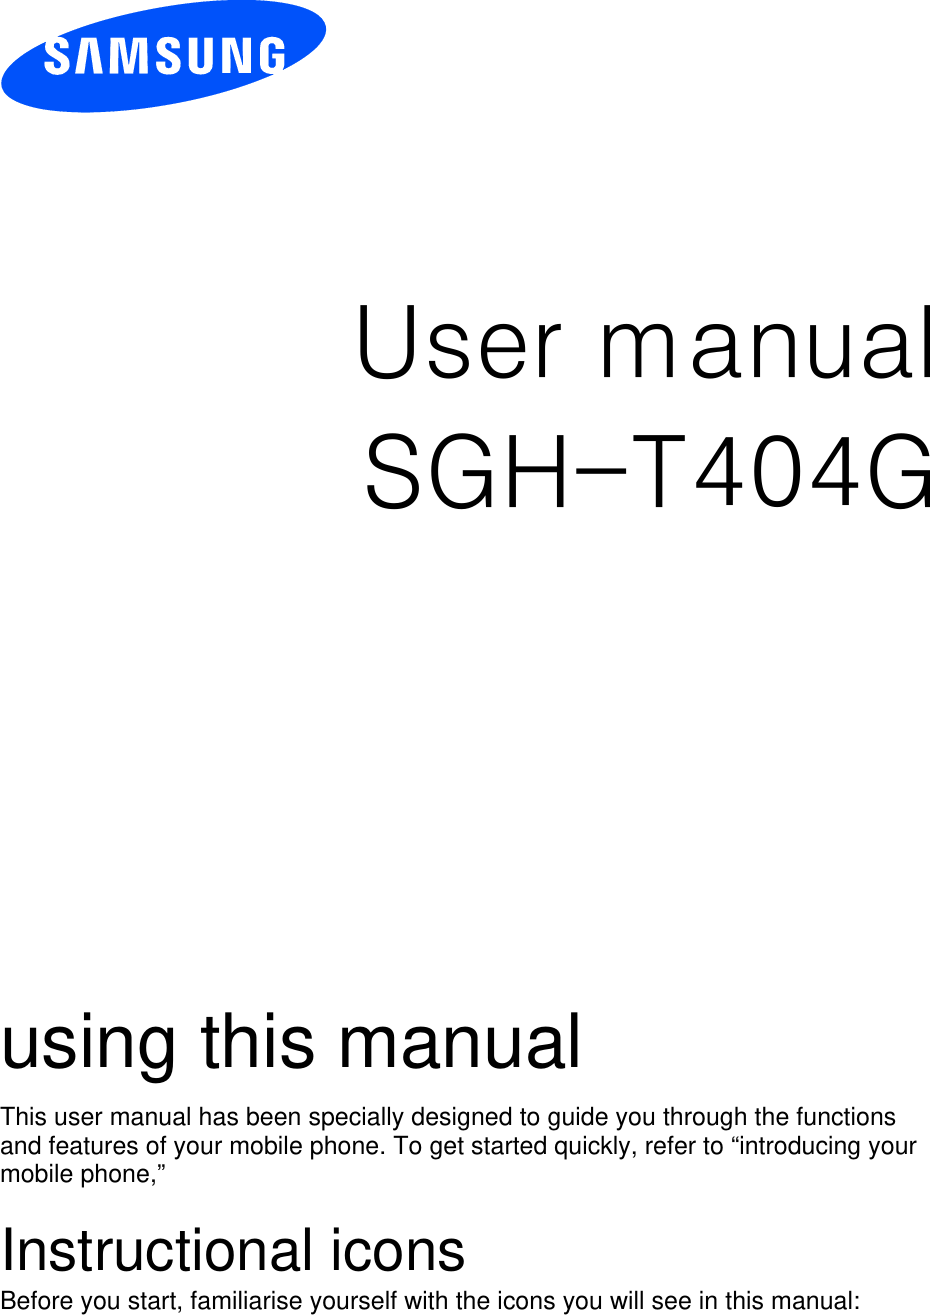          User manual SGH-T404G                  using this manual This user manual has been specially designed to guide you through the functions and features of your mobile phone. To get started quickly, refer to “Xintroducing your mobile phoneX,”  Instructional icons Before you start, familiarise yourself with the icons you will see in this manual:    